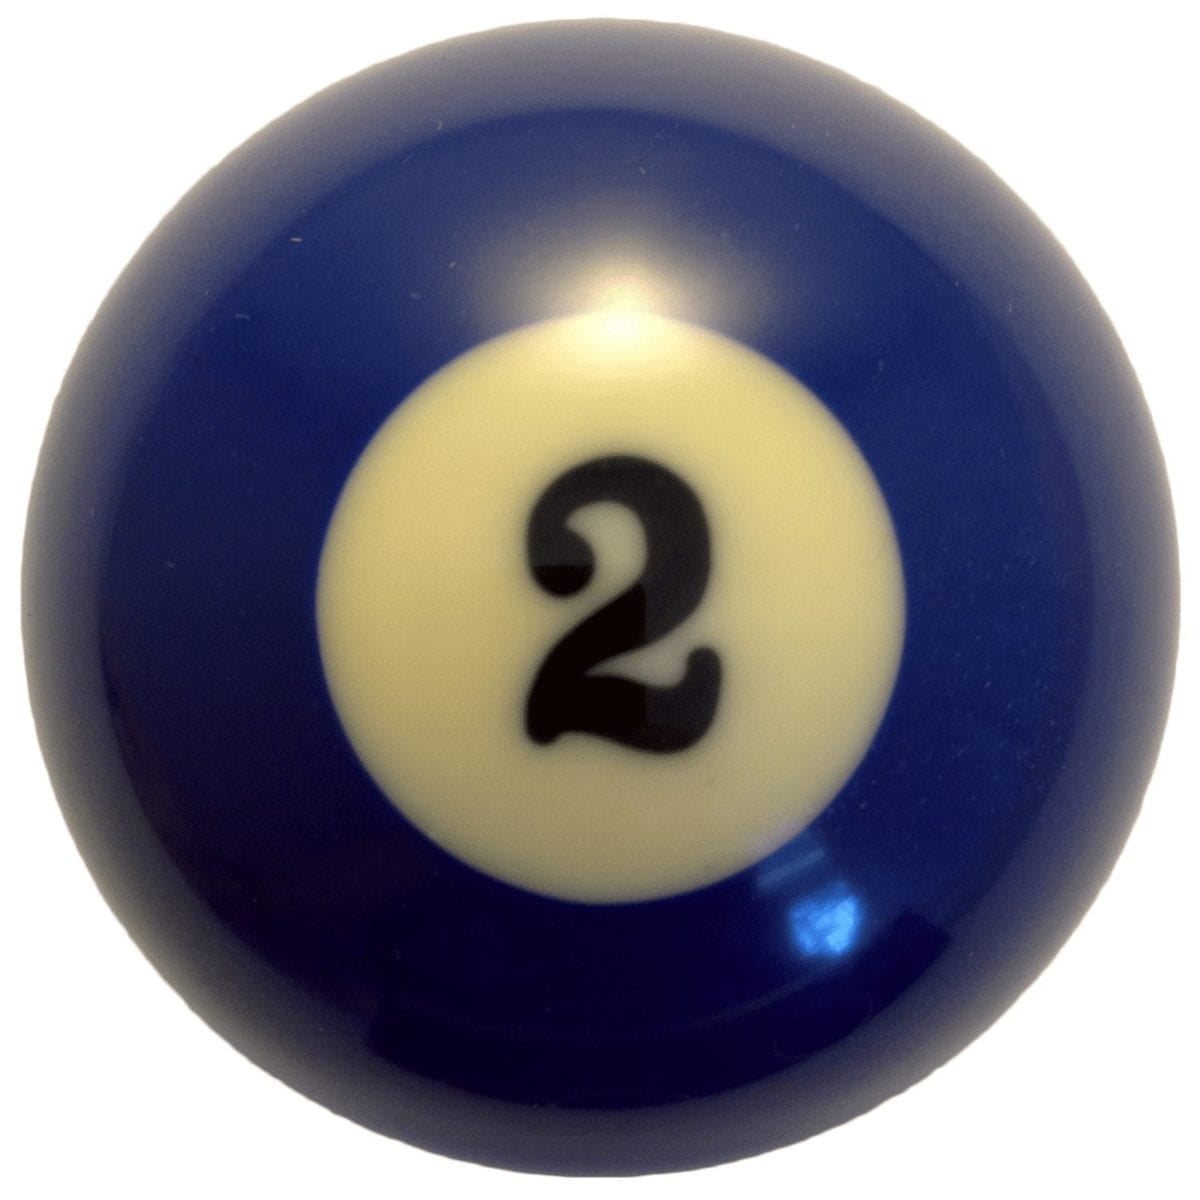 Details about   Classic Sport BILLIARD CUE BALL Official Size Ball 2.25 